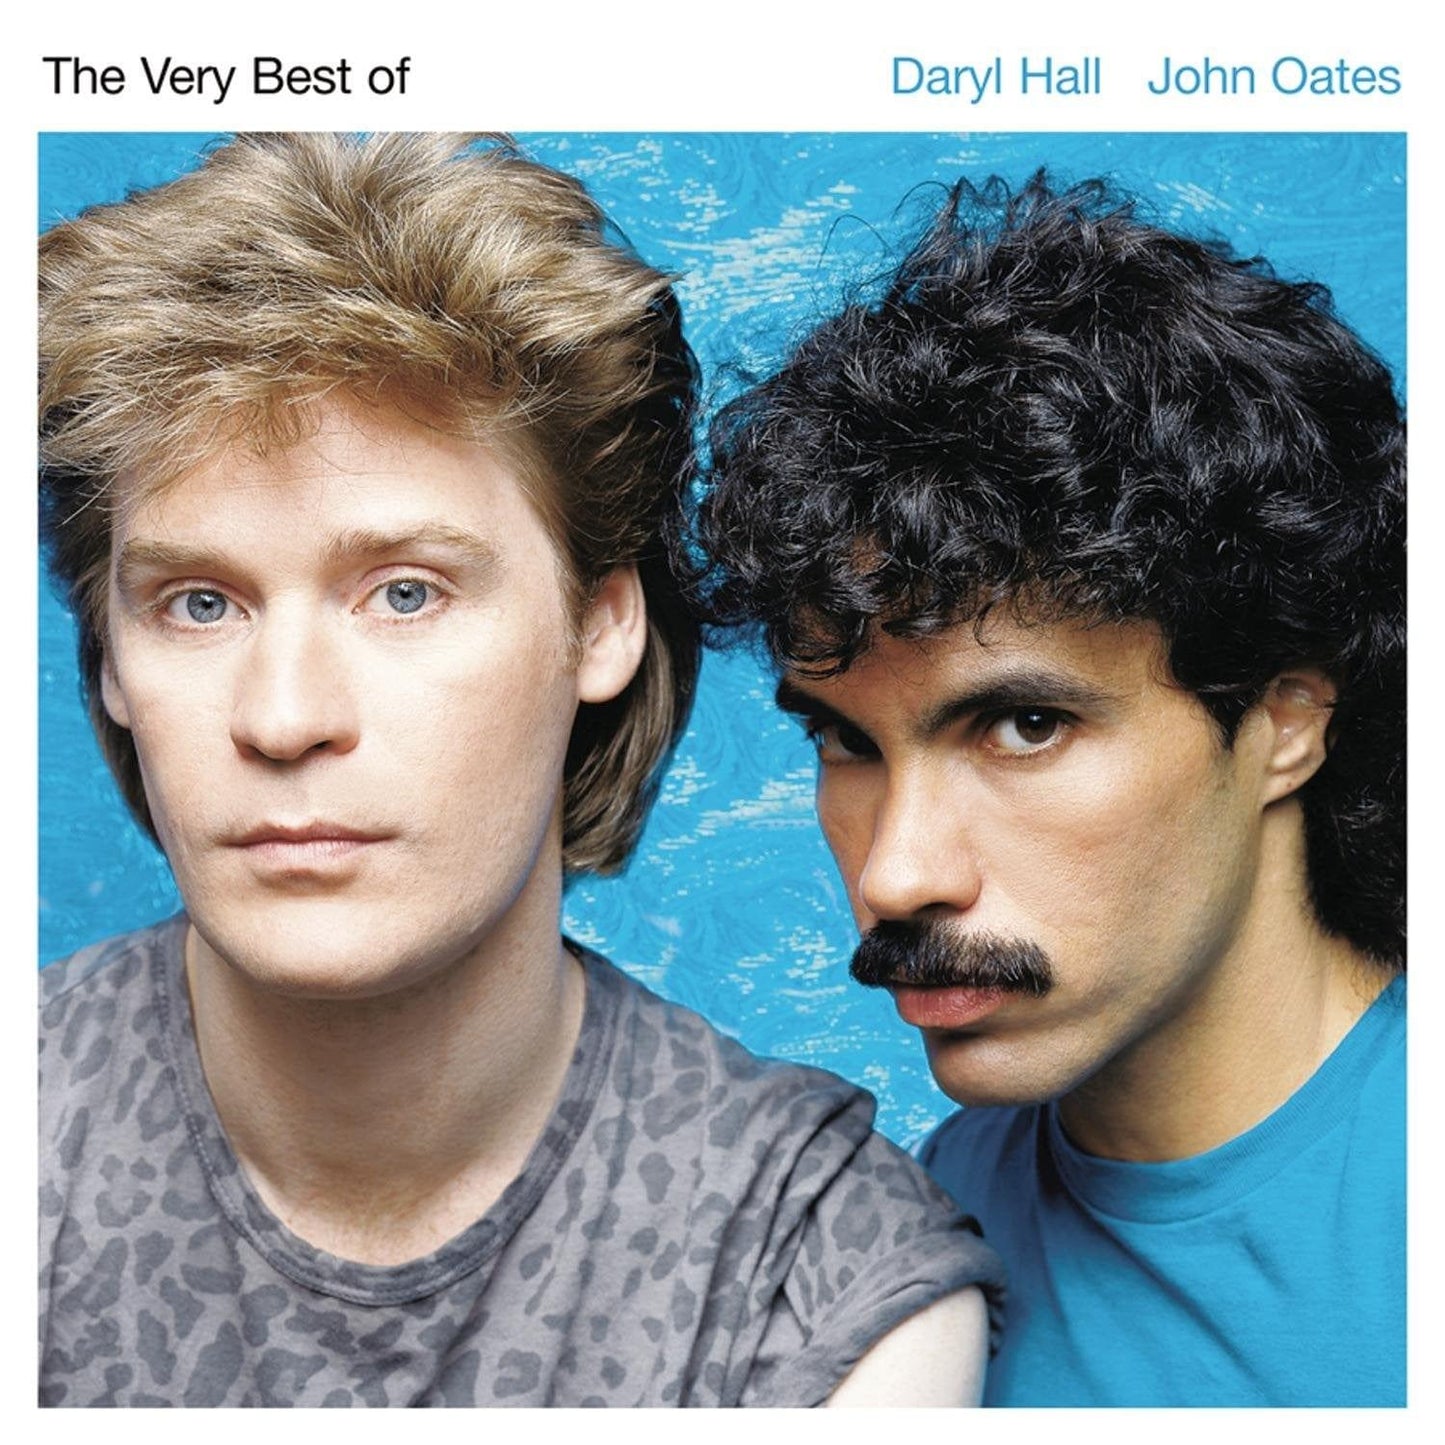 Hall & Oates - The Very Best Of Daryl Hall John Oates (Limited Edition, Remastered, Color Vinyl) (2 LP) - Joco Records